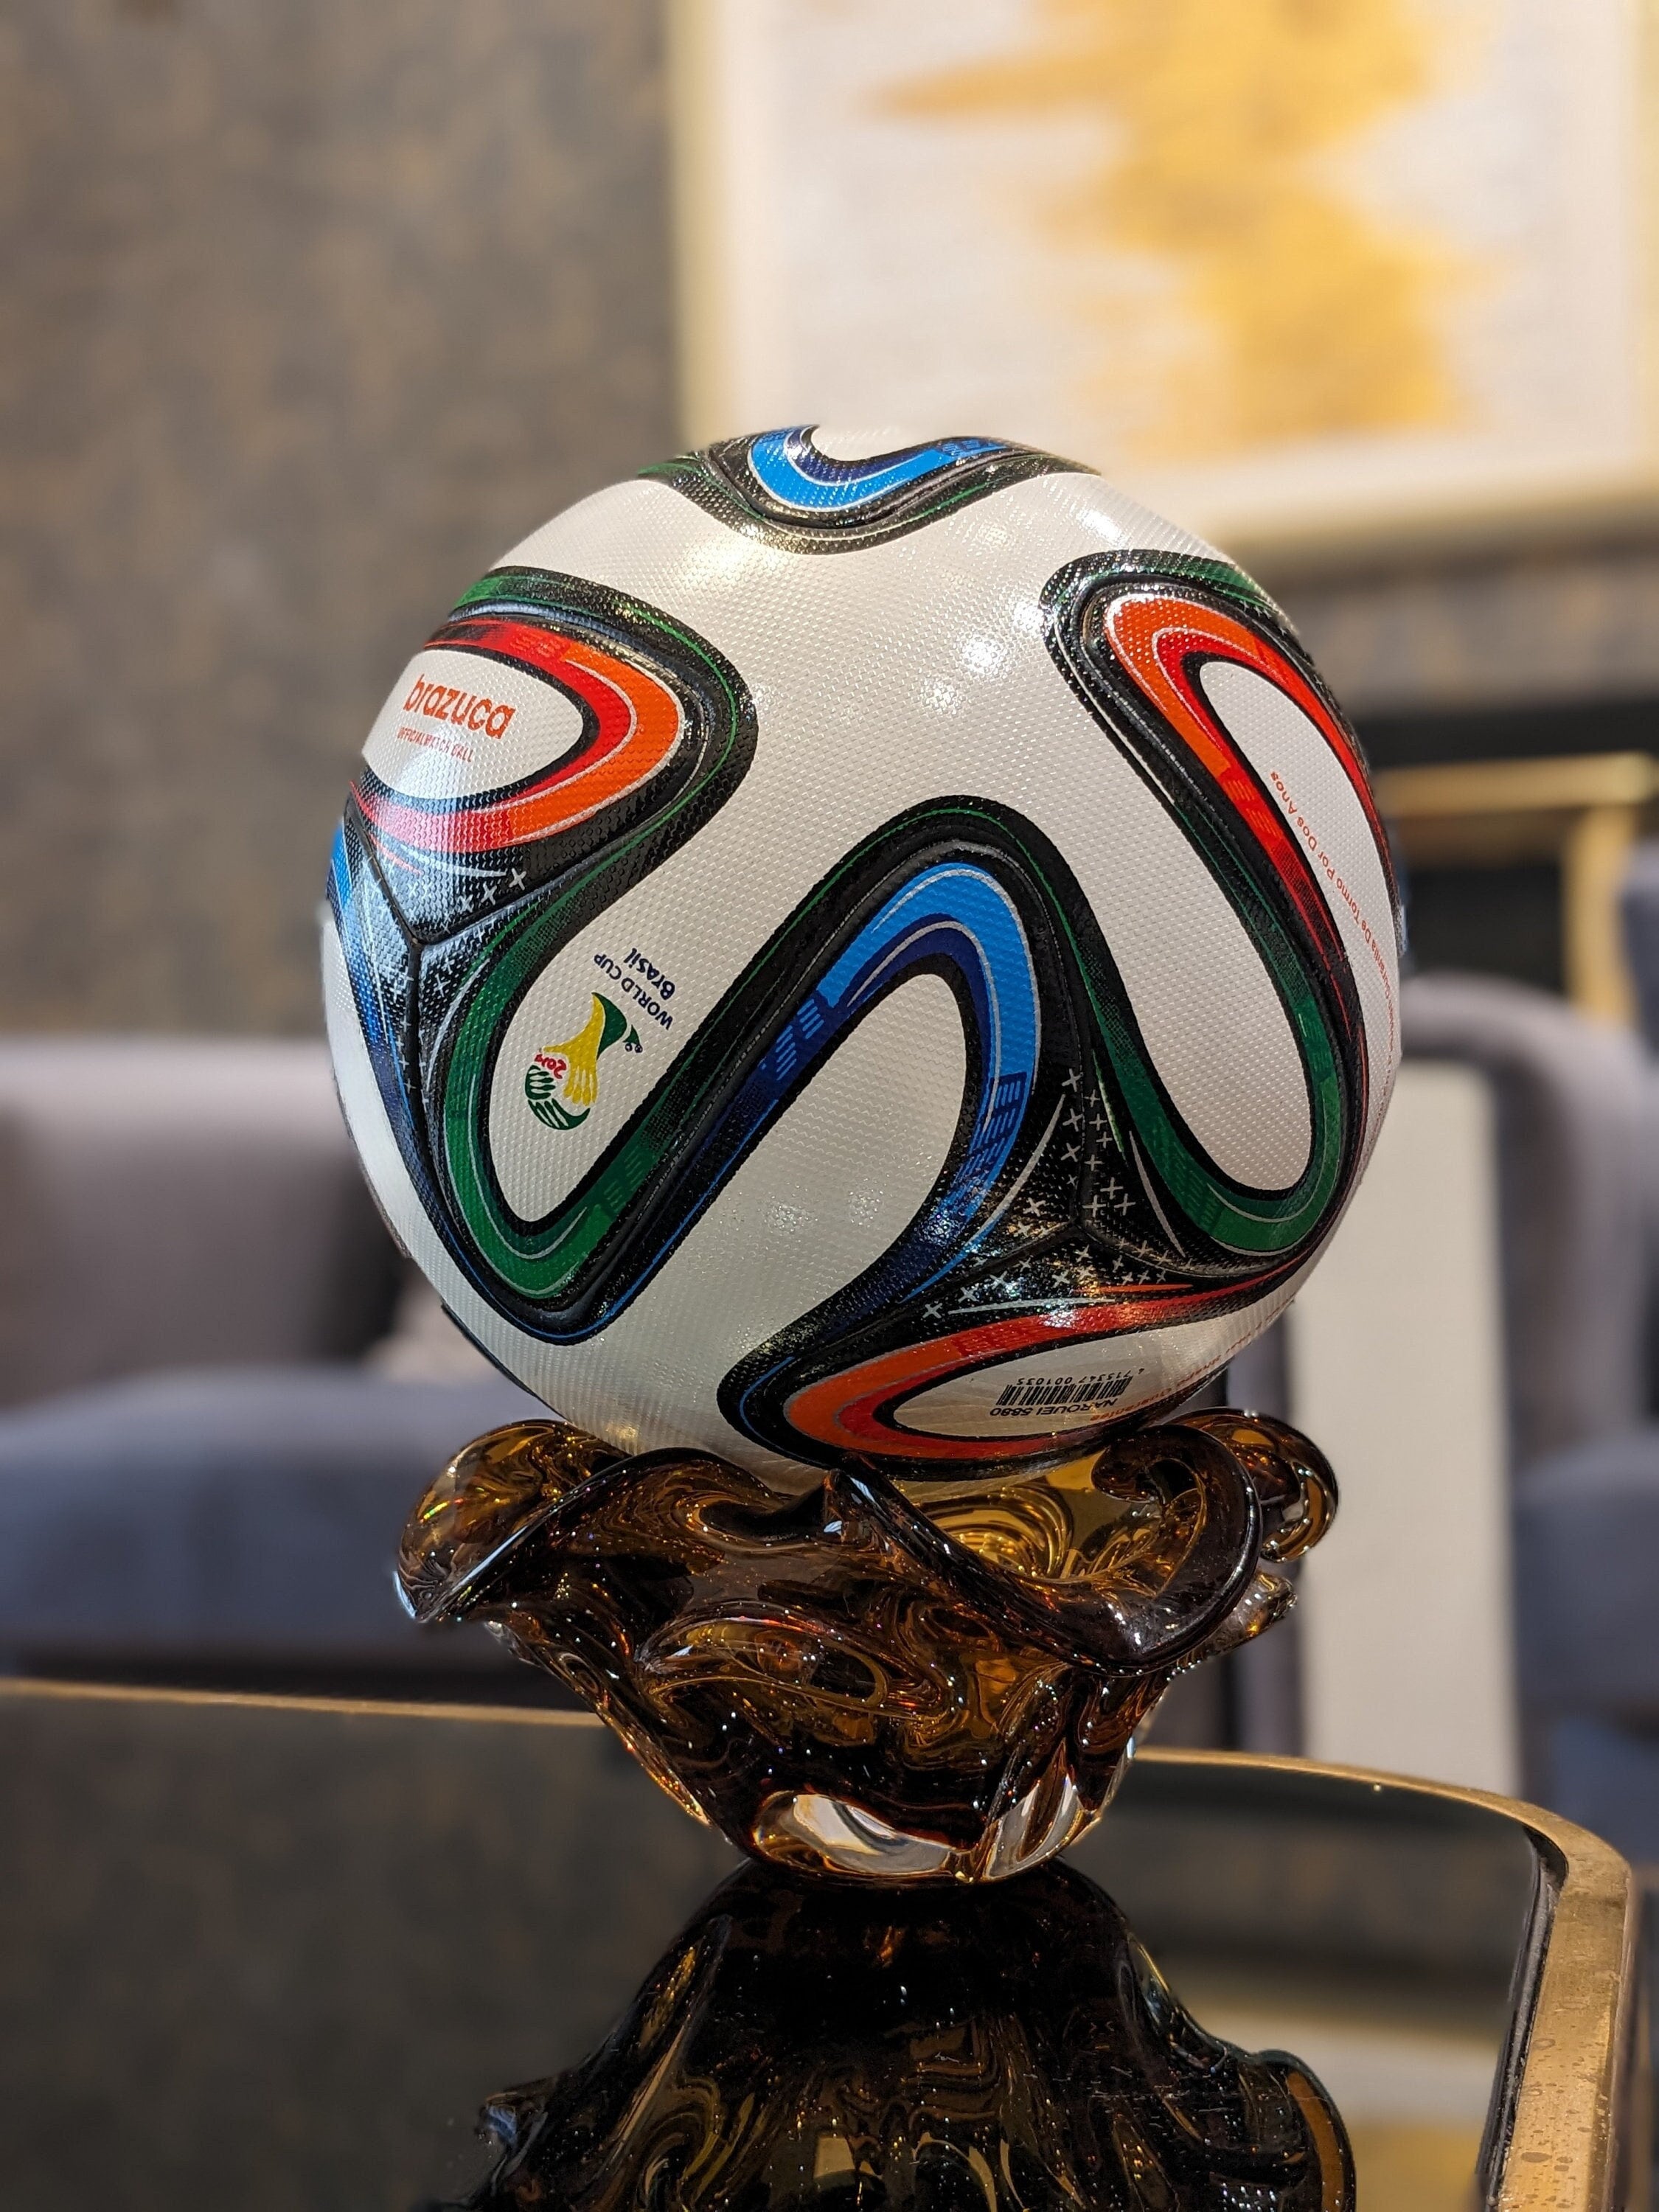 Adidas-Brazuca-Official-Match-Ball-from-the-2014-World-Cup : Buy